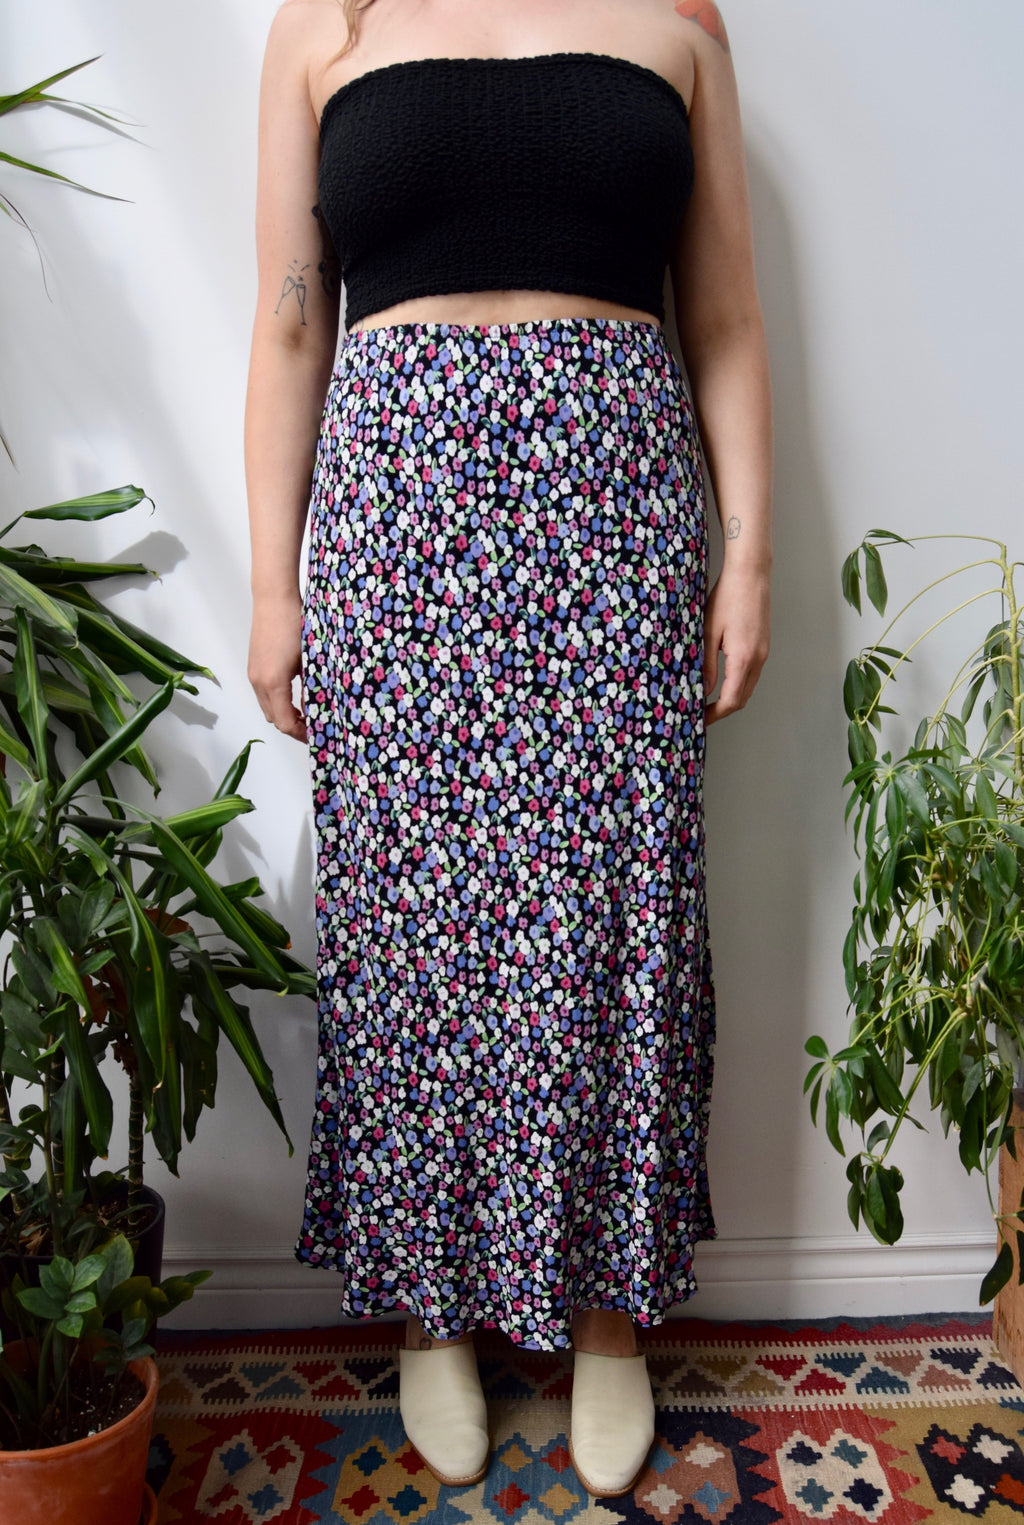 Floral Aughts Skirt